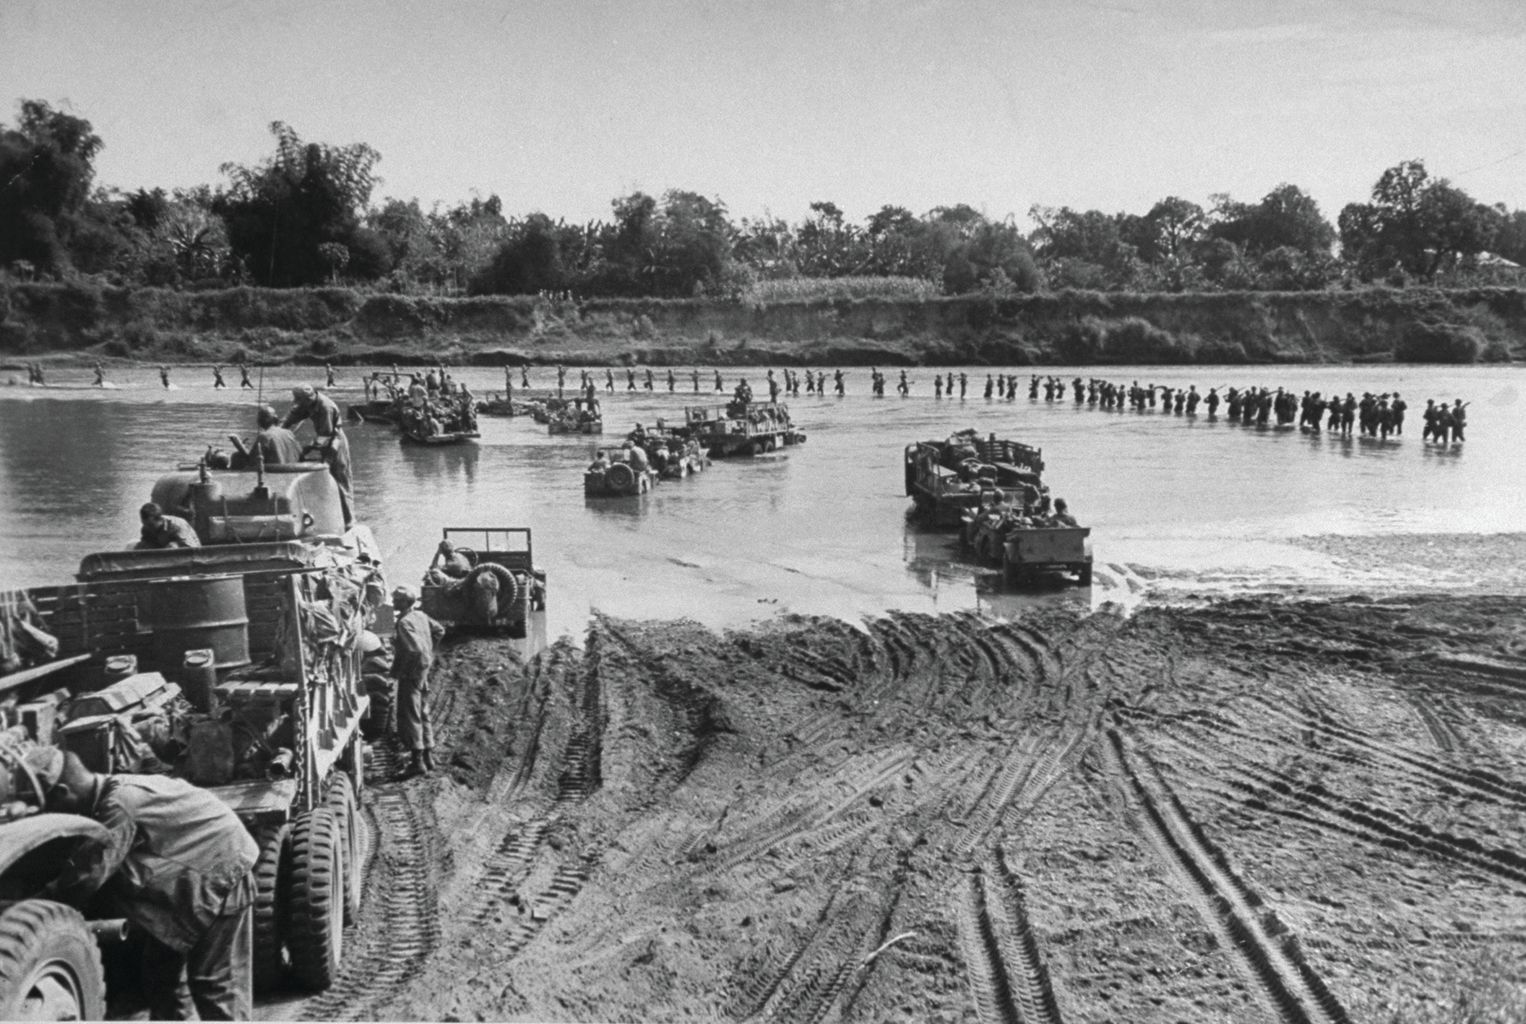 Troops and vehicles of the experienced 1st Cavalry Division cross the Pampanga River during the drive on Manila, January 31, 1945. The 1st Cav used the Marines’ close air support to help capture a key bridge into the city.